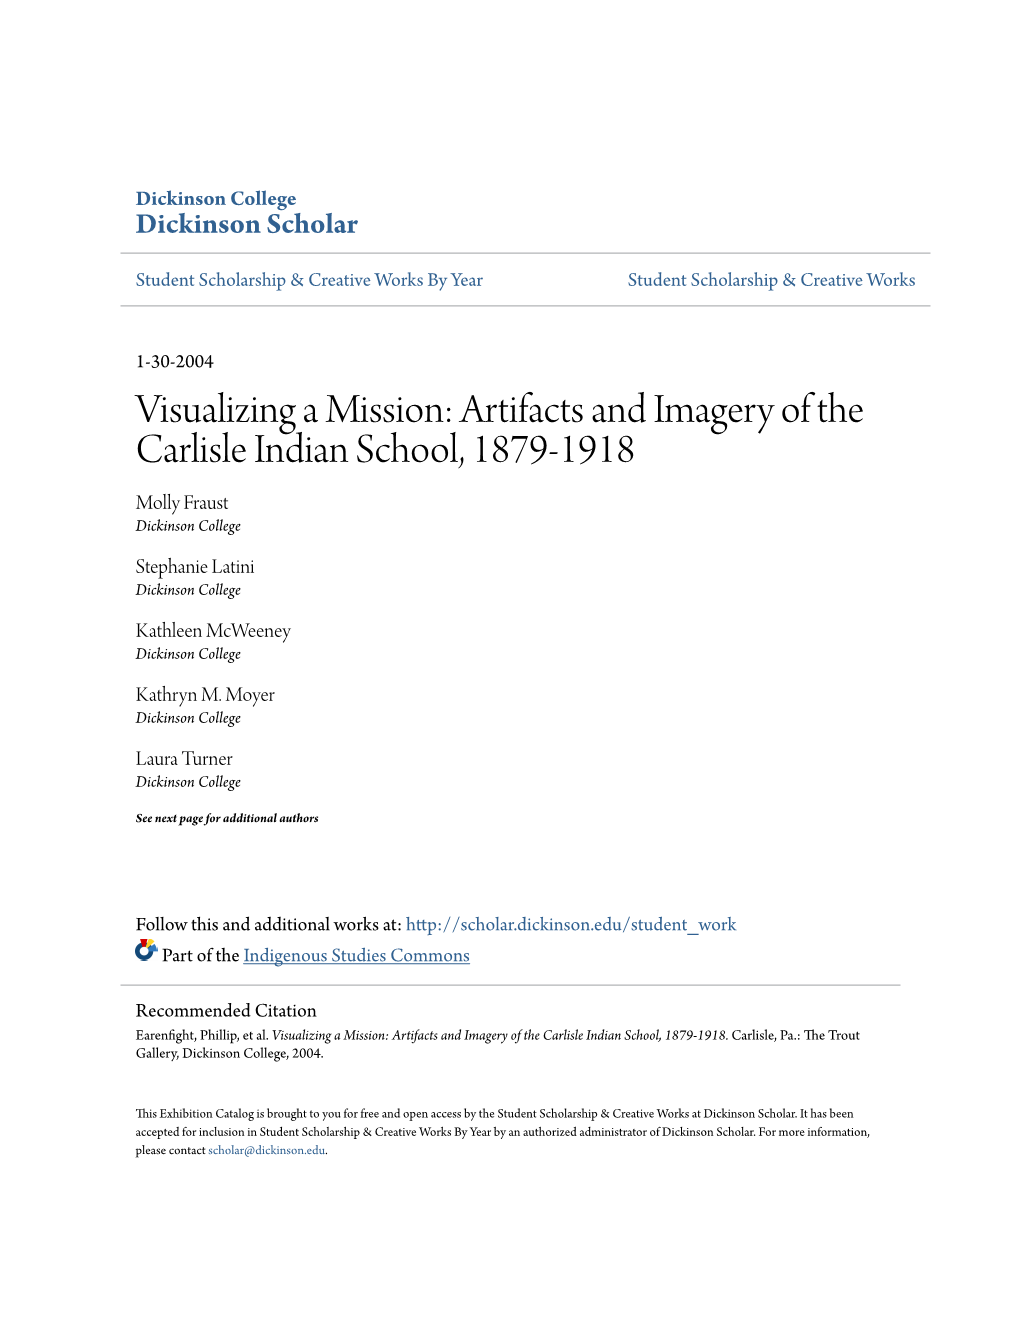 Artifacts and Imagery of the Carlisle Indian School, 1879-1918 Molly Fraust Dickinson College